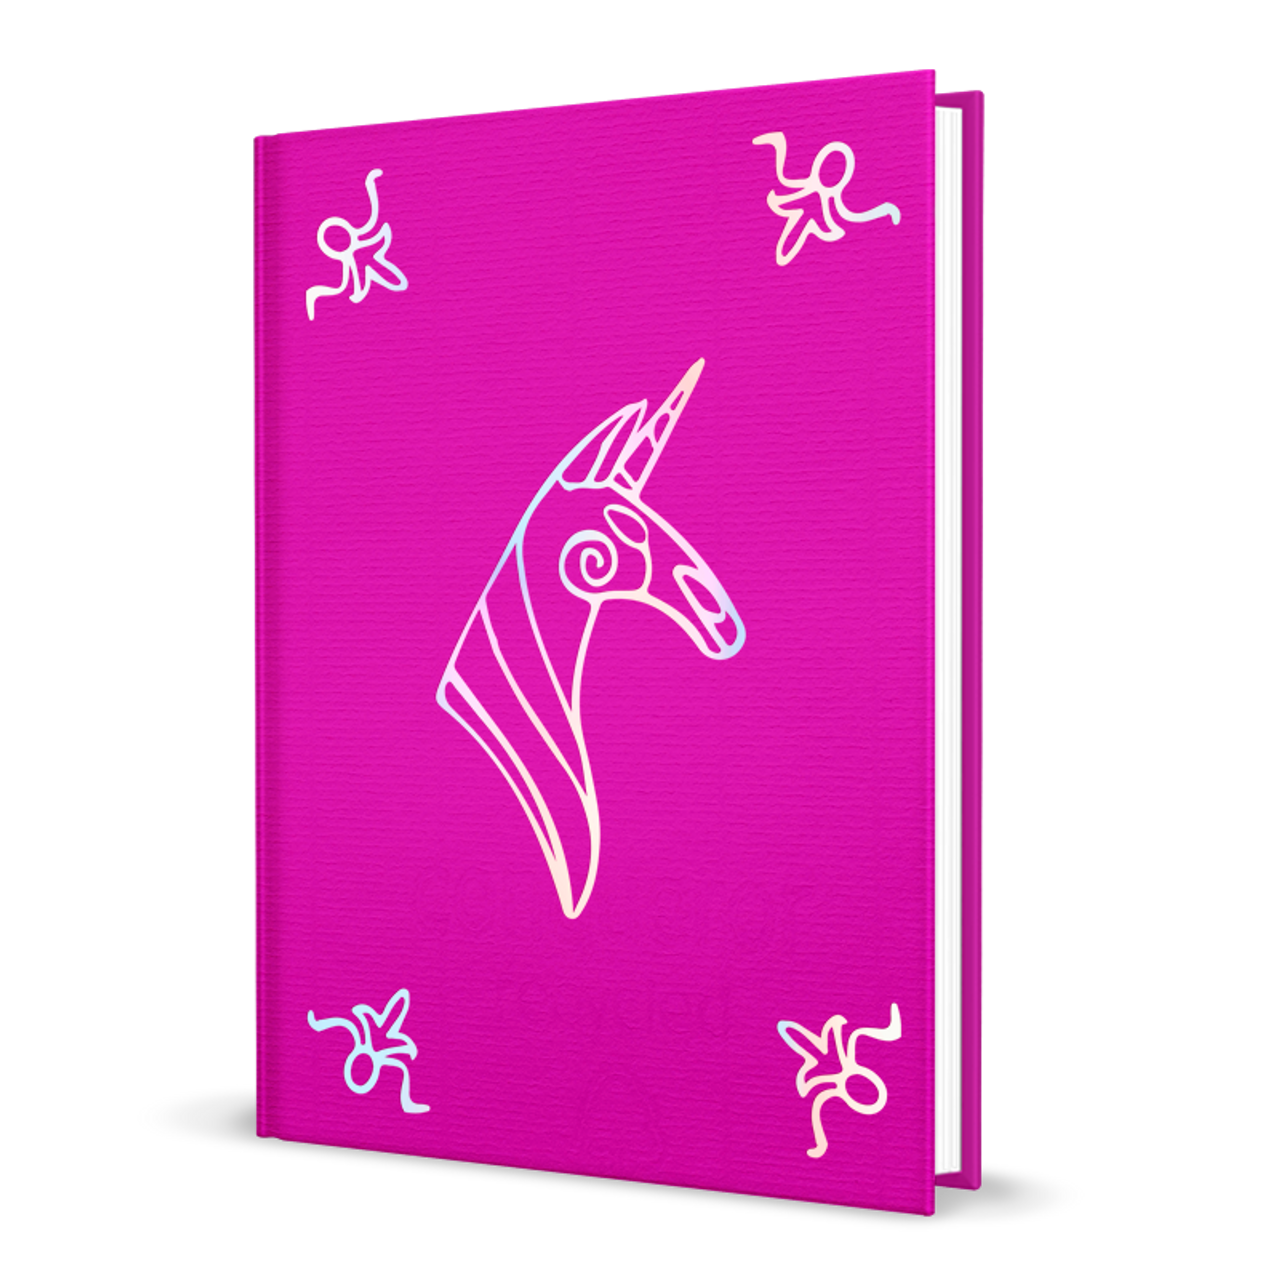 MY LITTLE PONY CHARACTER JOURNAL